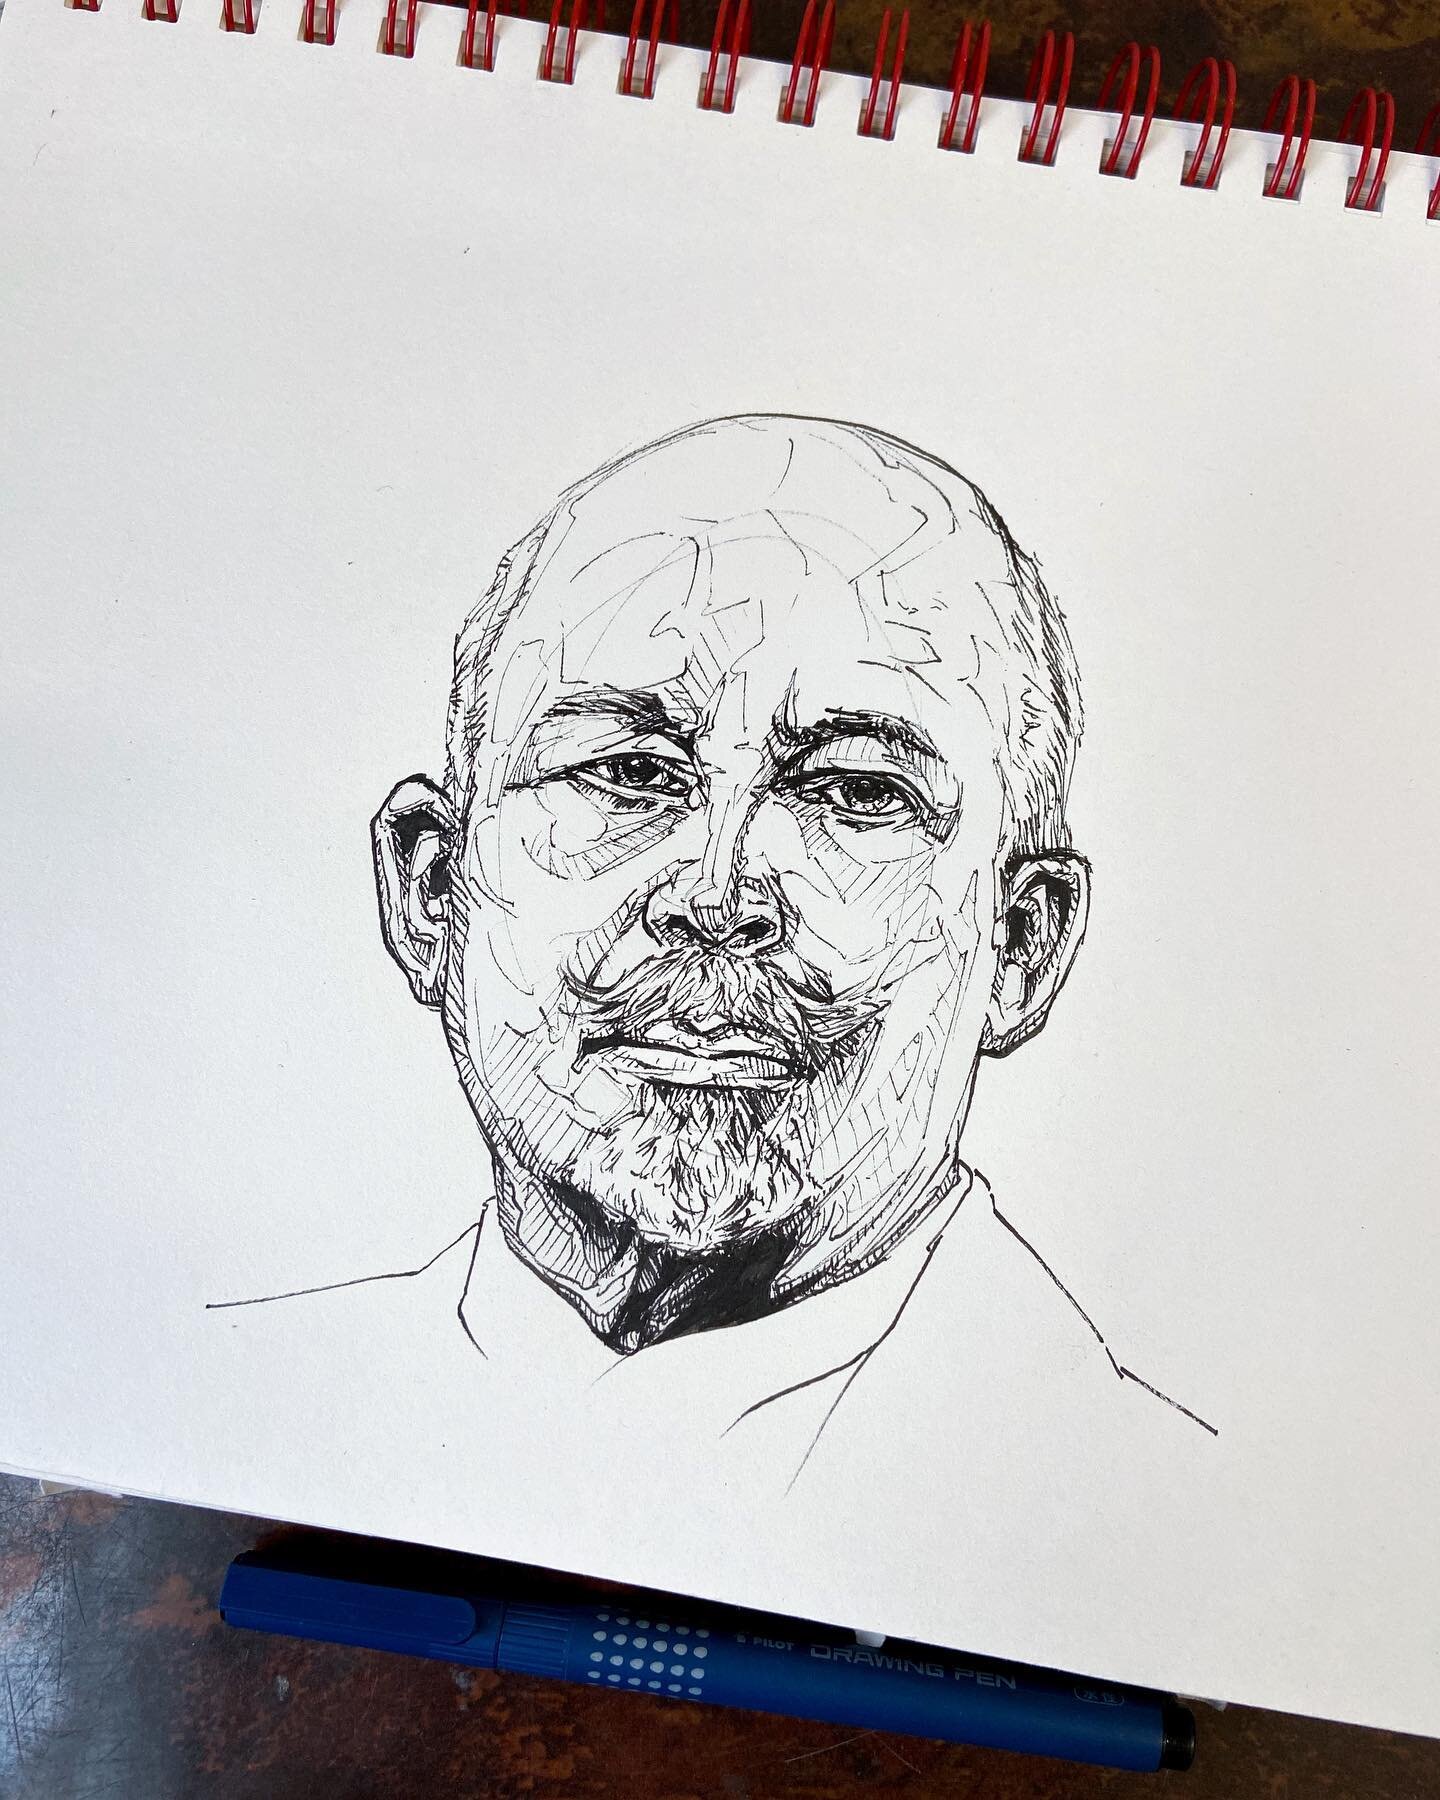 Participating in the @sprayingbricks book club, and this month is W. E. B. Du Bois &ldquo;The Soul Of Black Folk&rdquo;. Thought a sketch might be a good way to kick things off #history
.
.
.
.
.
.
.
.
.
.
.
.
.
#jeffblackburn #webdubois #sprayingbri